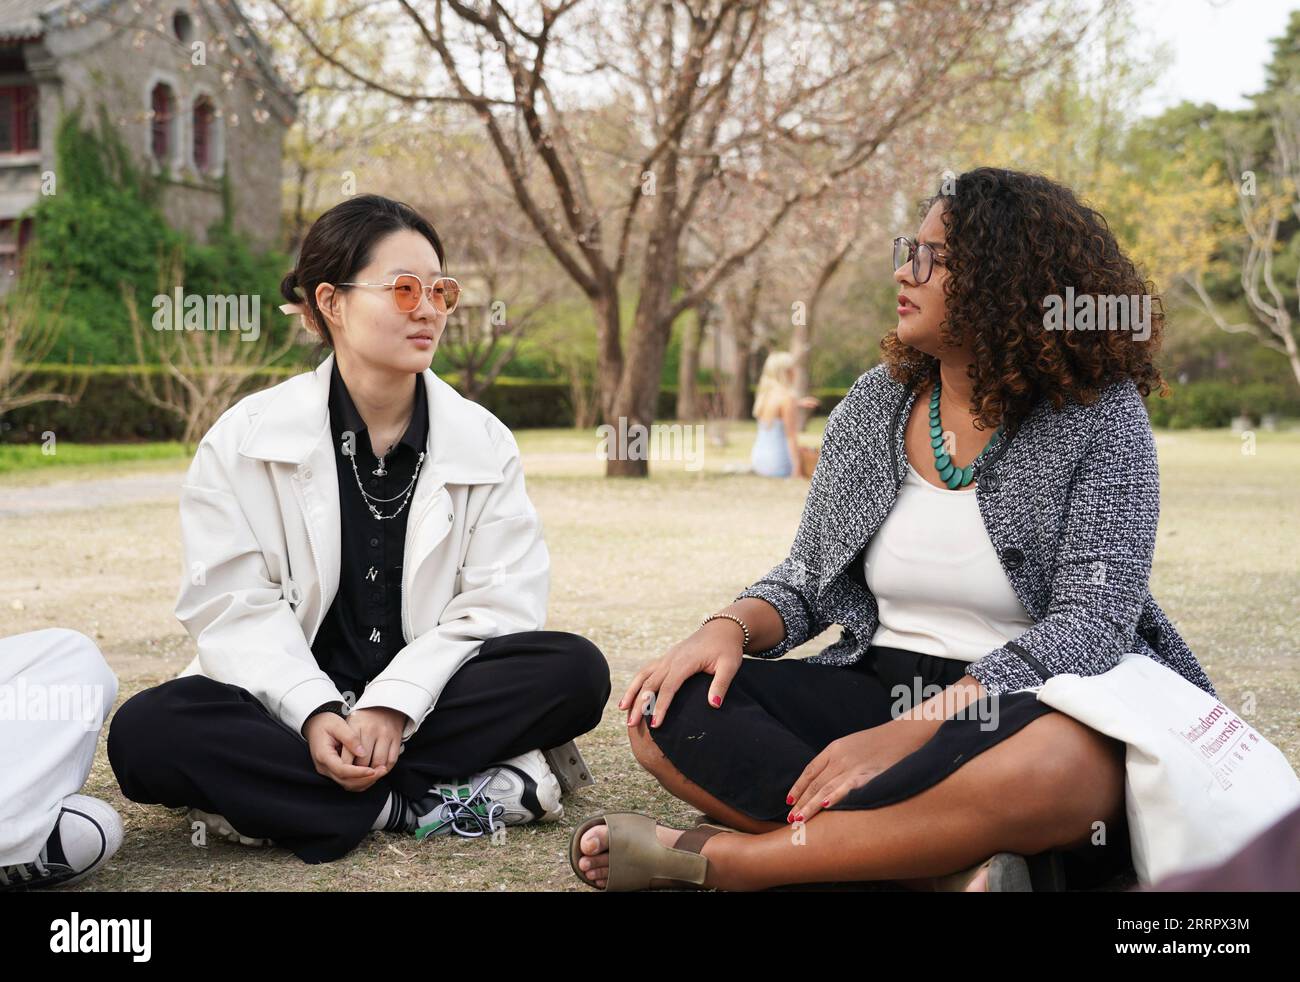 230415 -- BEIJING, April 15, 2023 -- Rafaela R chats with a schoolmate at Peking University in Beijing, capital of China, March 31, 2023. Maria Eduarda Variani, Rafaela Viana dos Santos, Manuela Boiteux Pestana, and Marco Andre Rocha Germano are Brazilian students studying in the Master of China Studies program at the Yenching Academy of Peking University in China. The four of them have been interested in Chinese culture since they were young. After arriving in Beijing, they have been impressed by the Chinese capital s profound cultural heritage, convenient public services, and fabulous citysc Stock Photo